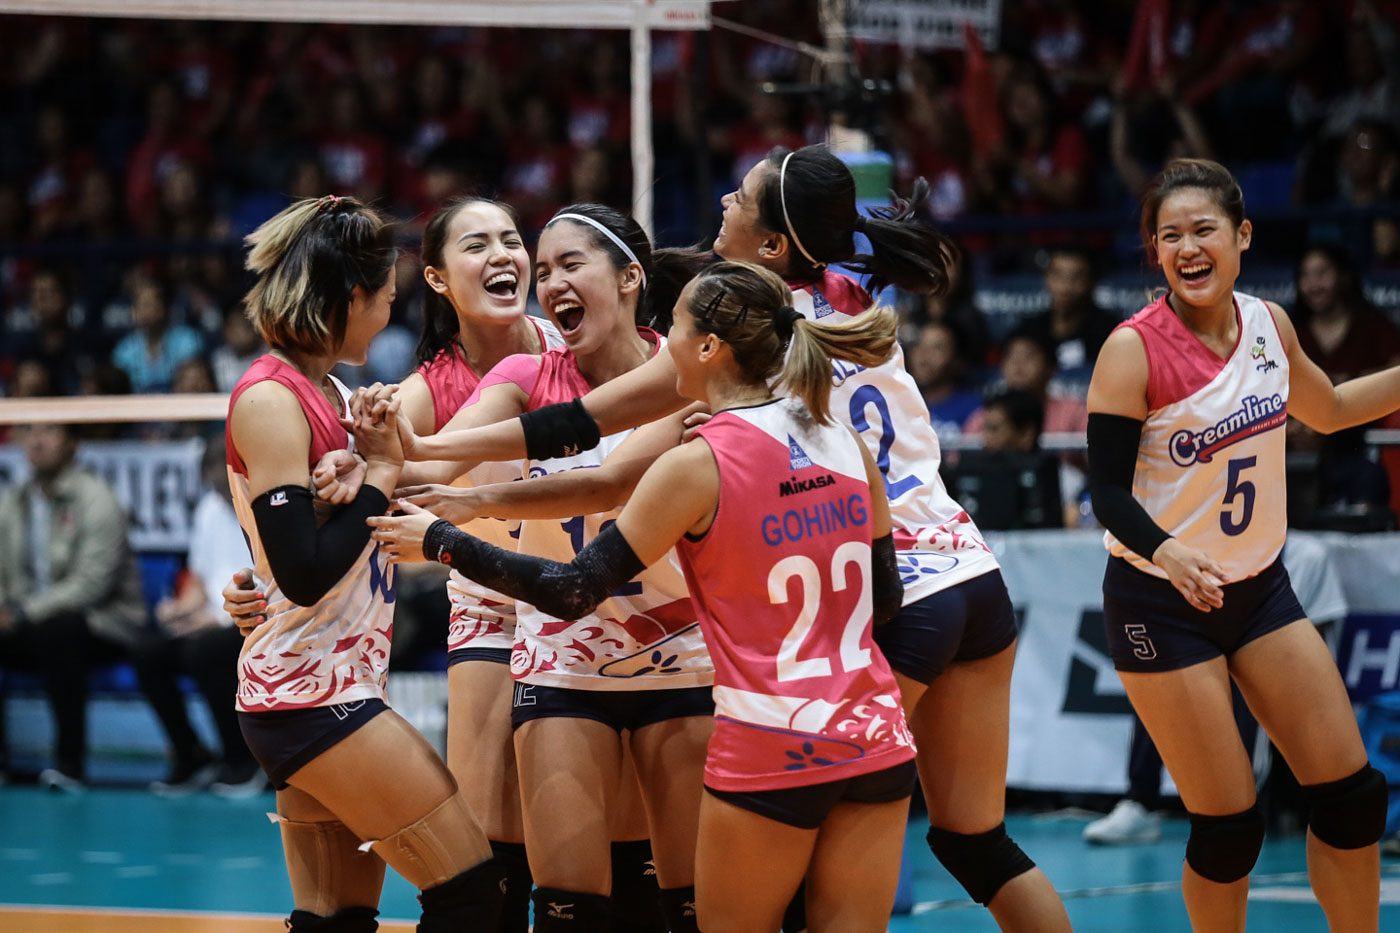 Creamline pins first loss on PayMaya, regains share of lead